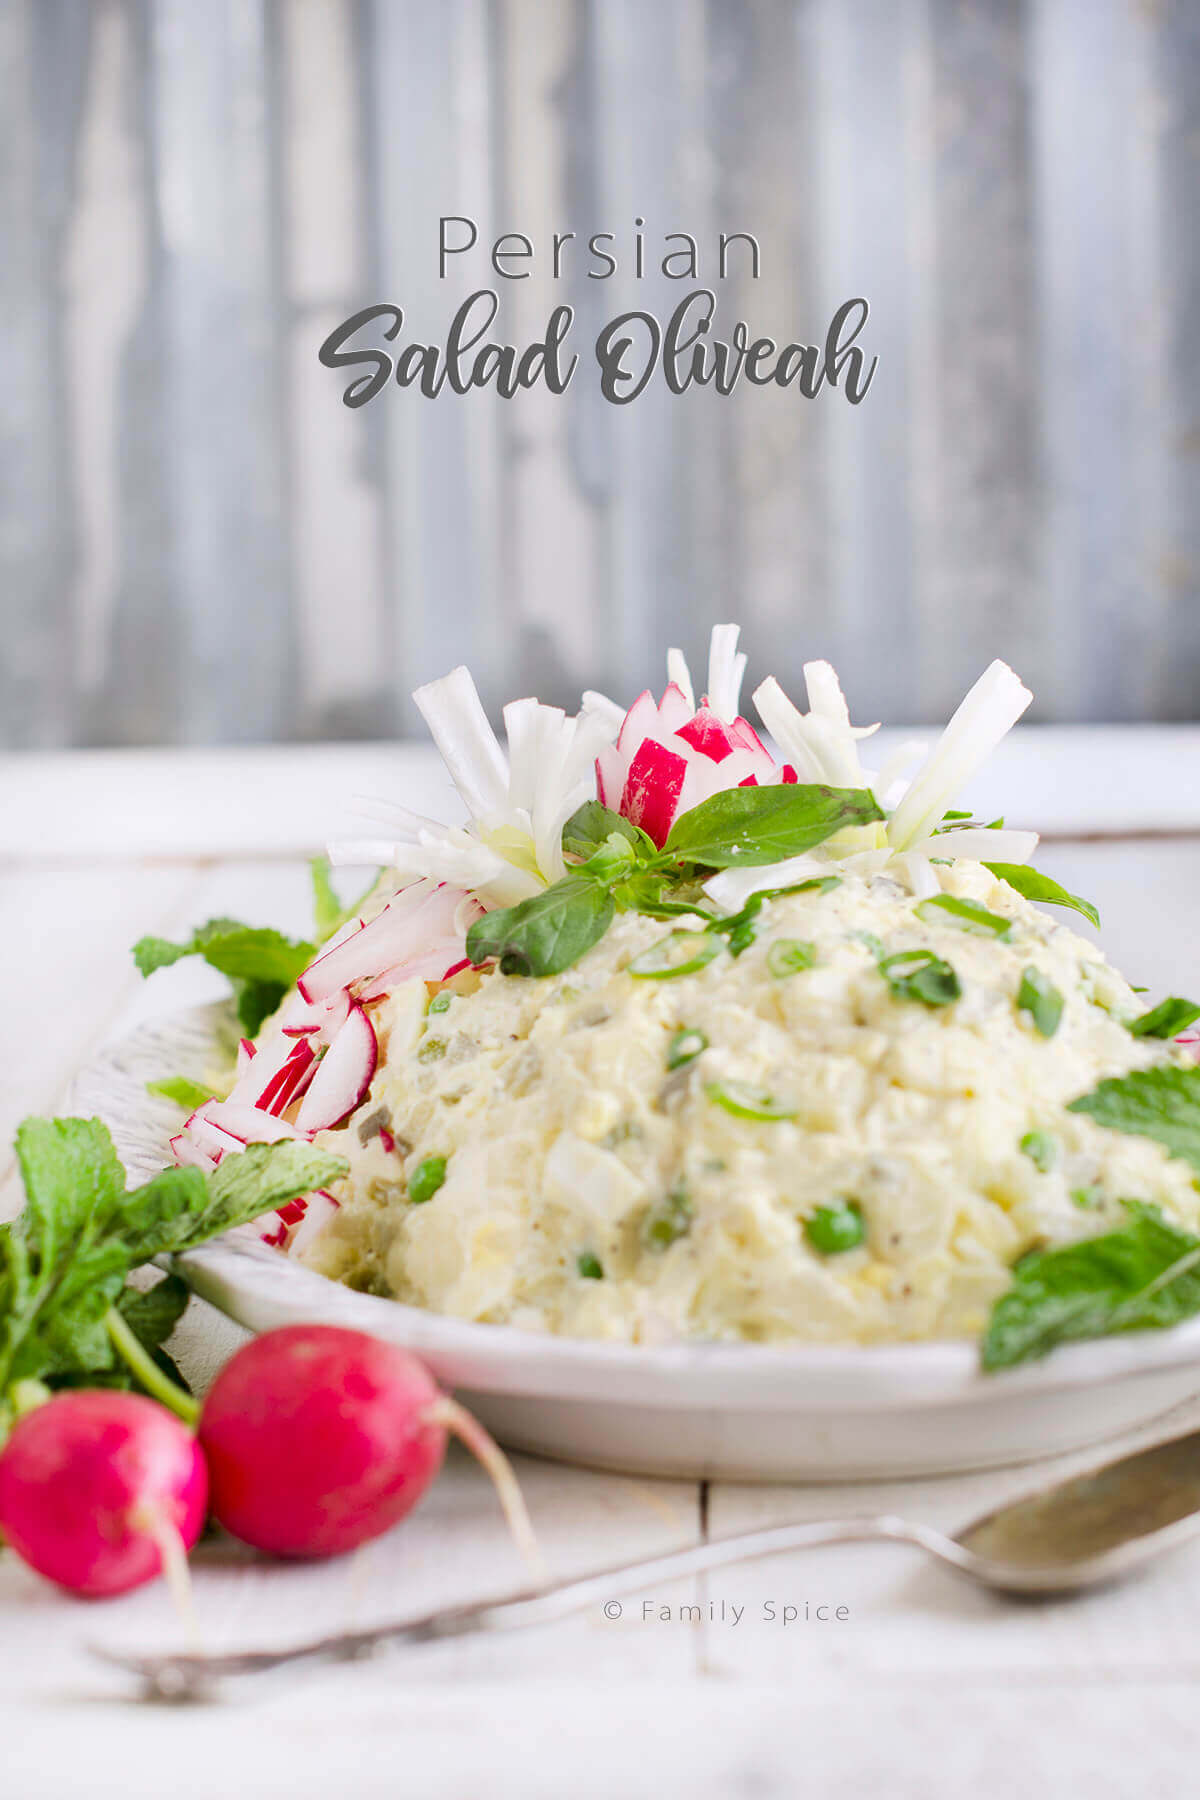 Salad Olivieh (Persian Potato Salad with Chicken) - Family Spice